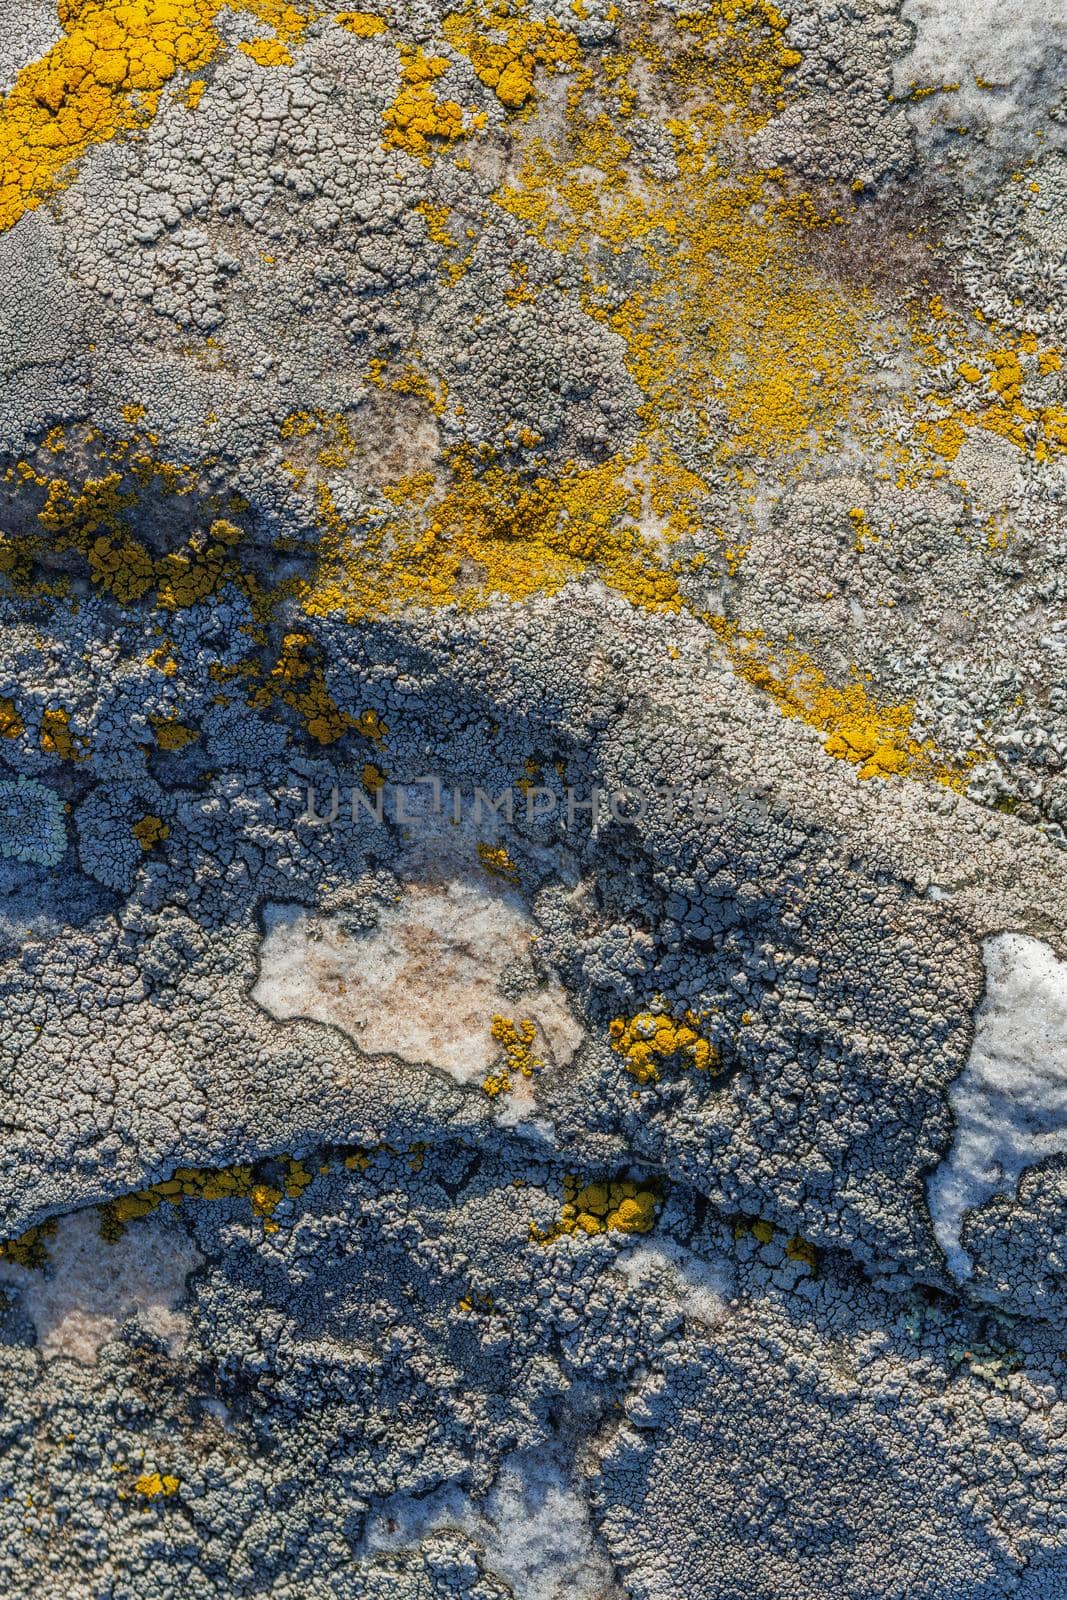 Lichen on quartzite sandstone surface. A pioneer lichen in Bare Rock Succession that helps break down rock and sets the stage for mosses and other plants to follow succession.